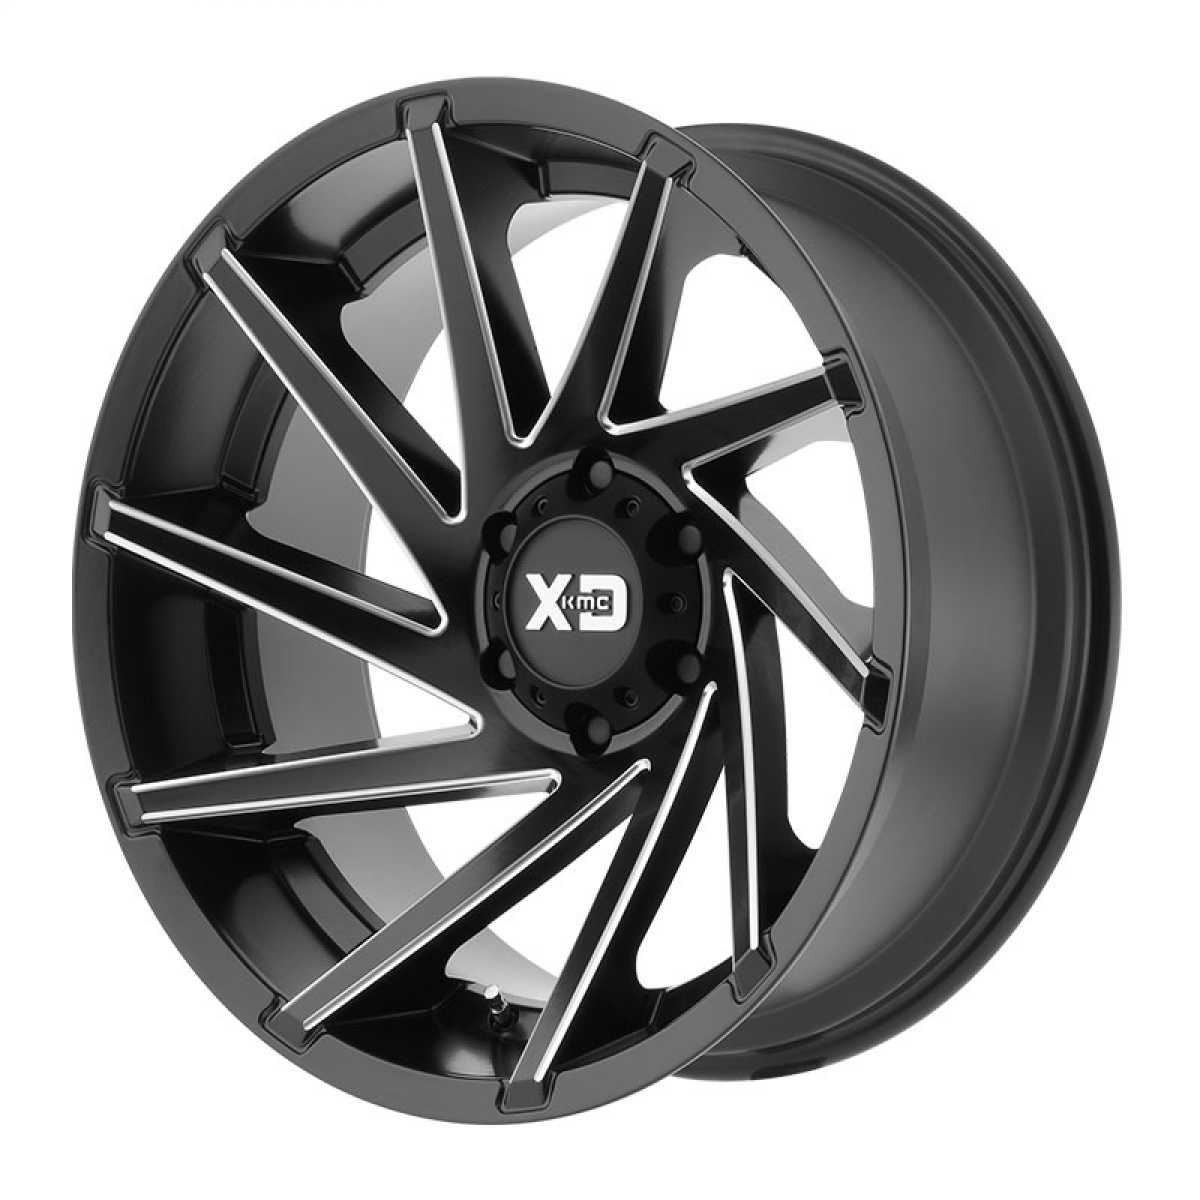 XD Series By KMC Cyclone